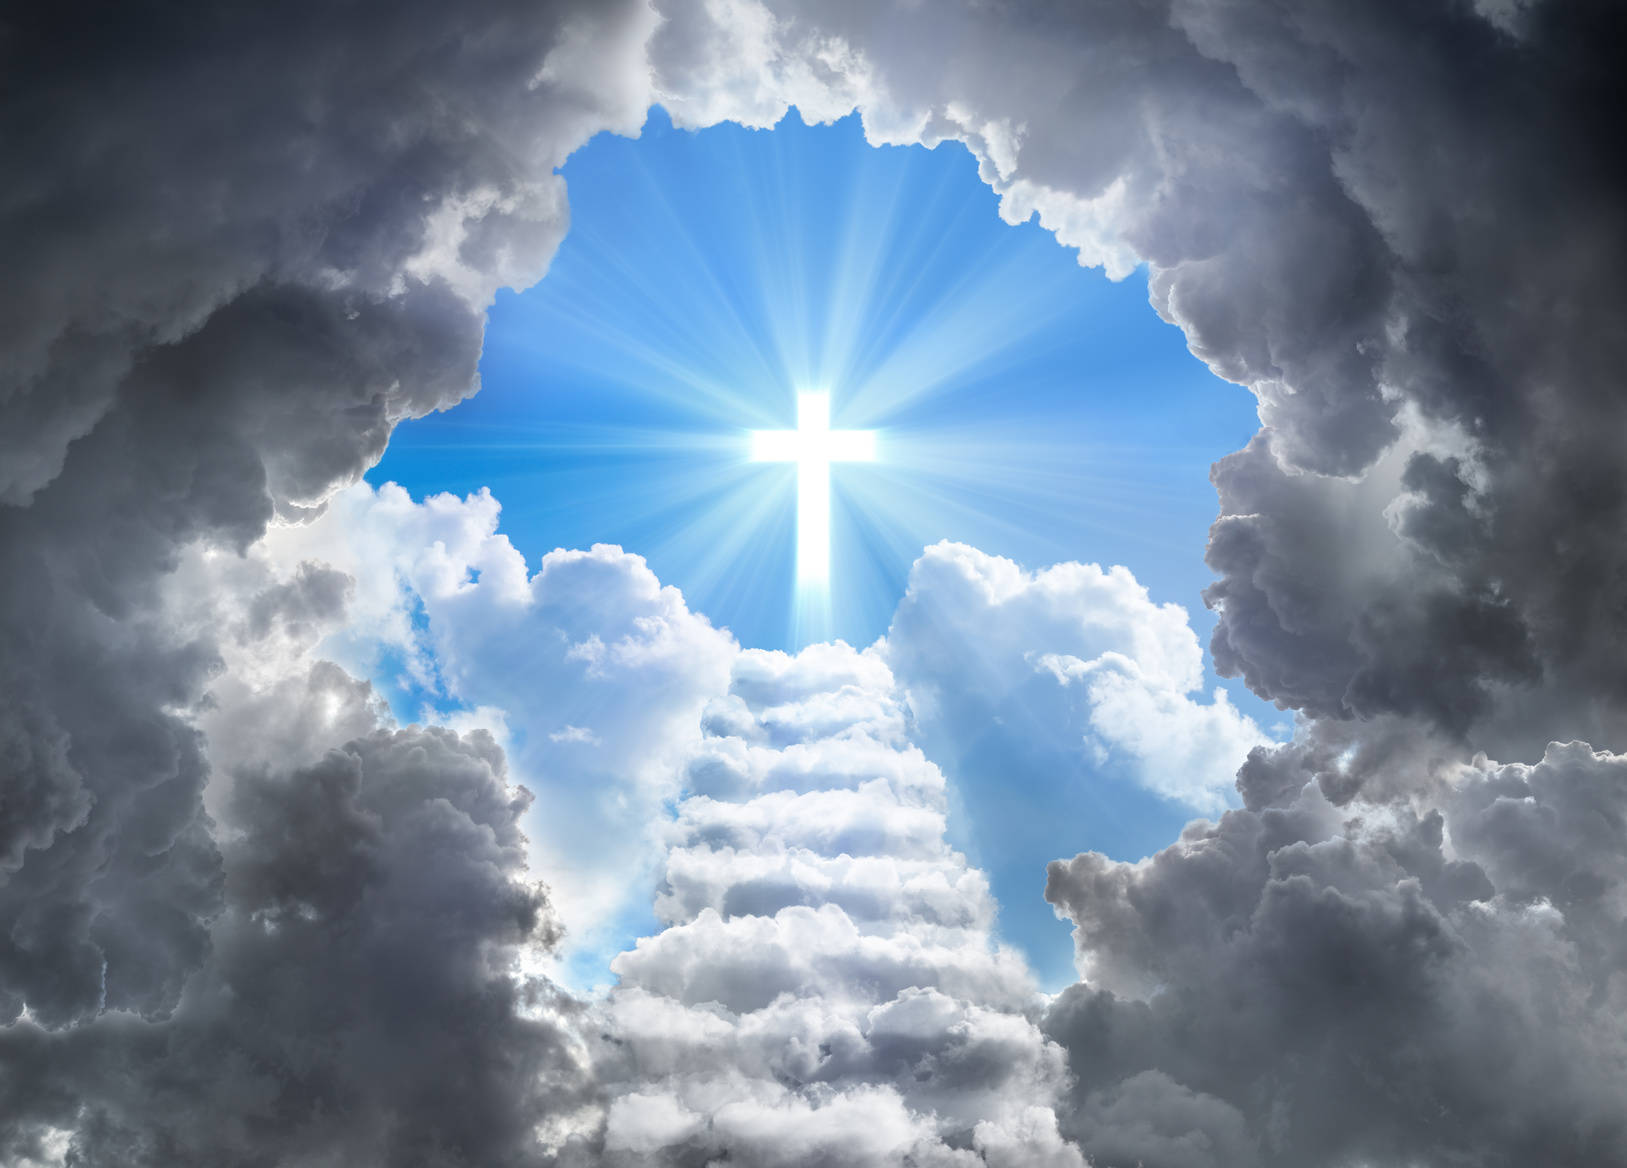 Catholic Funeral Clouds With Cross Background